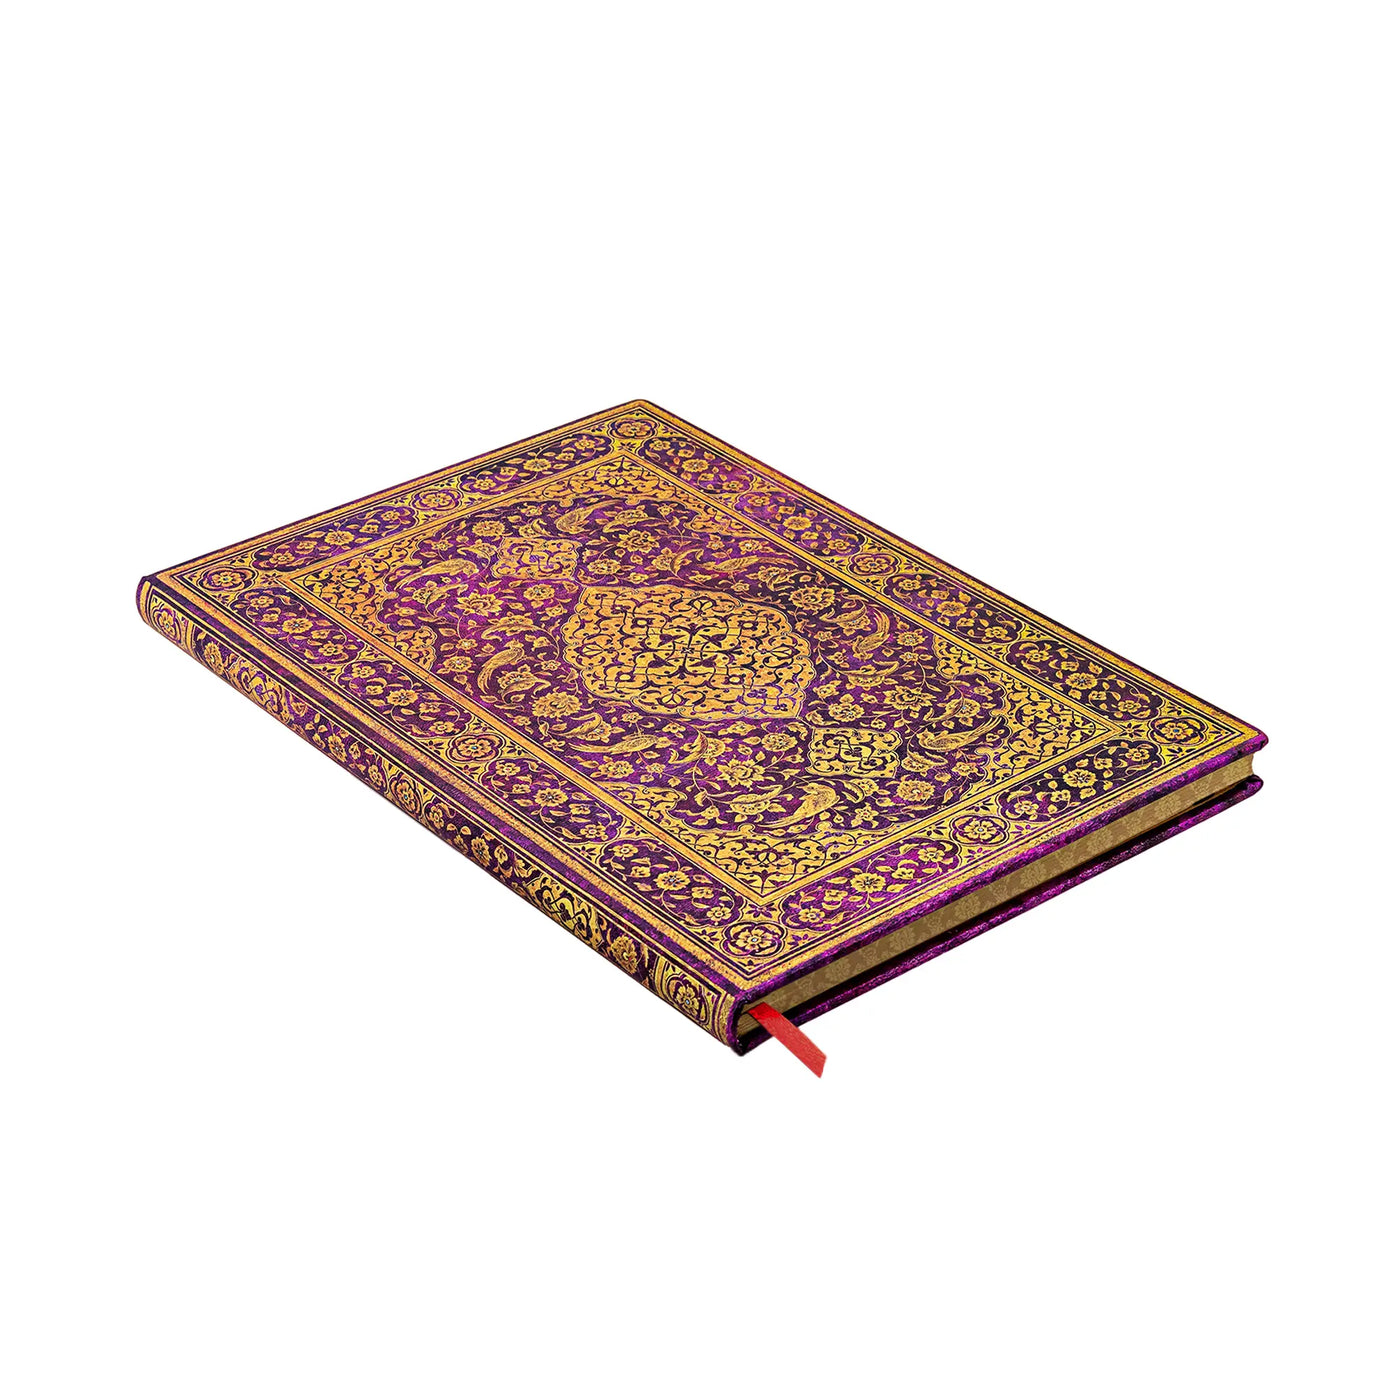 Paperblanks Persian Poetry, The Orchard Grande 8.25 x 11.75 Journal